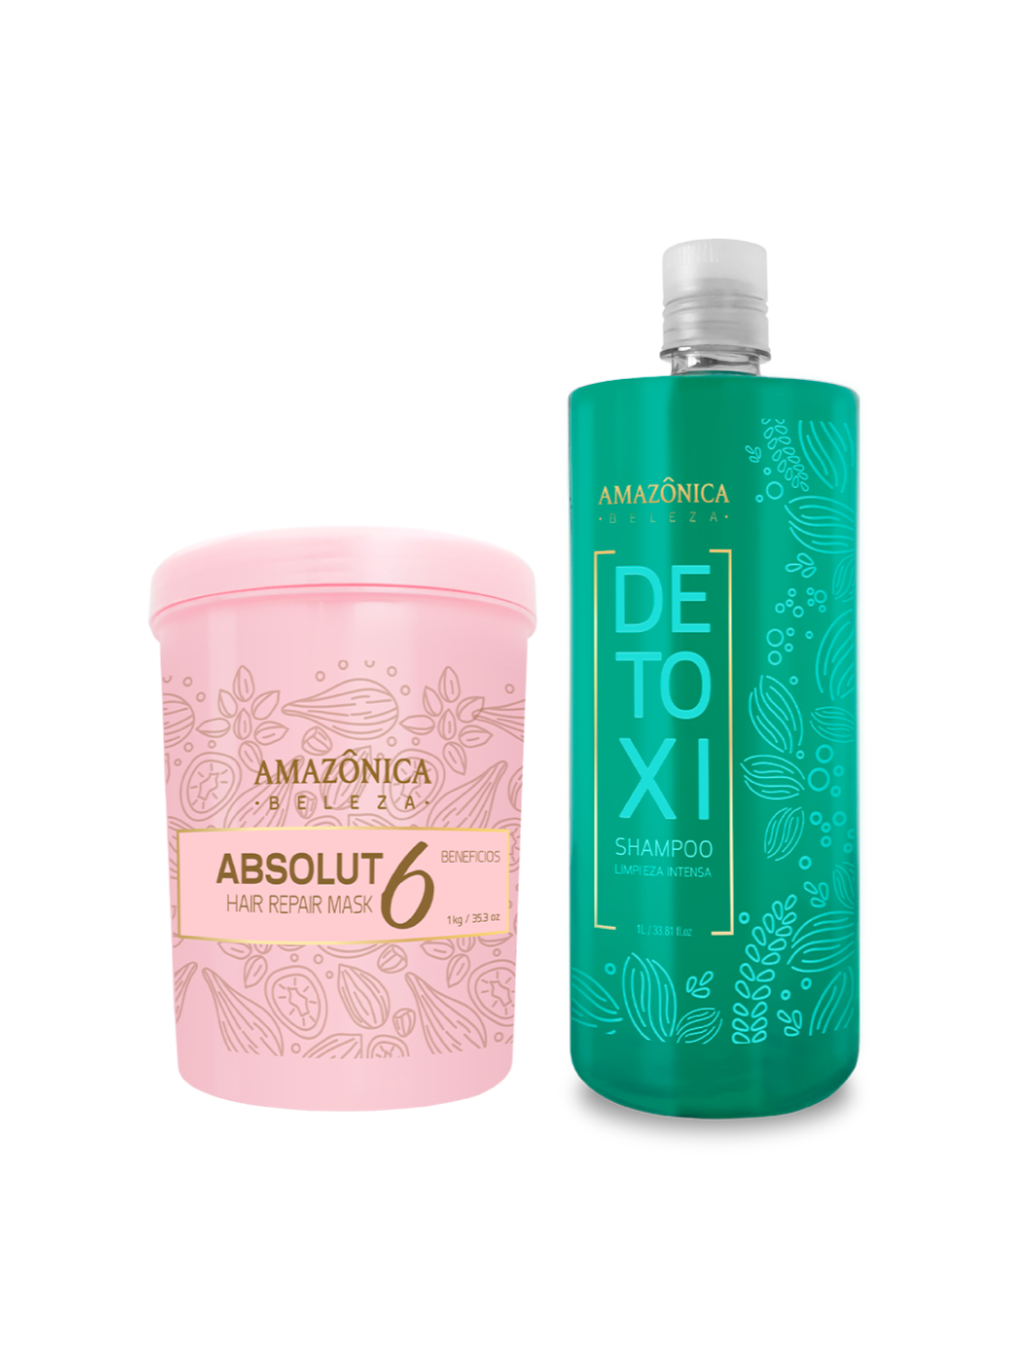 Hair Detox Therapy, Detox and Absolut